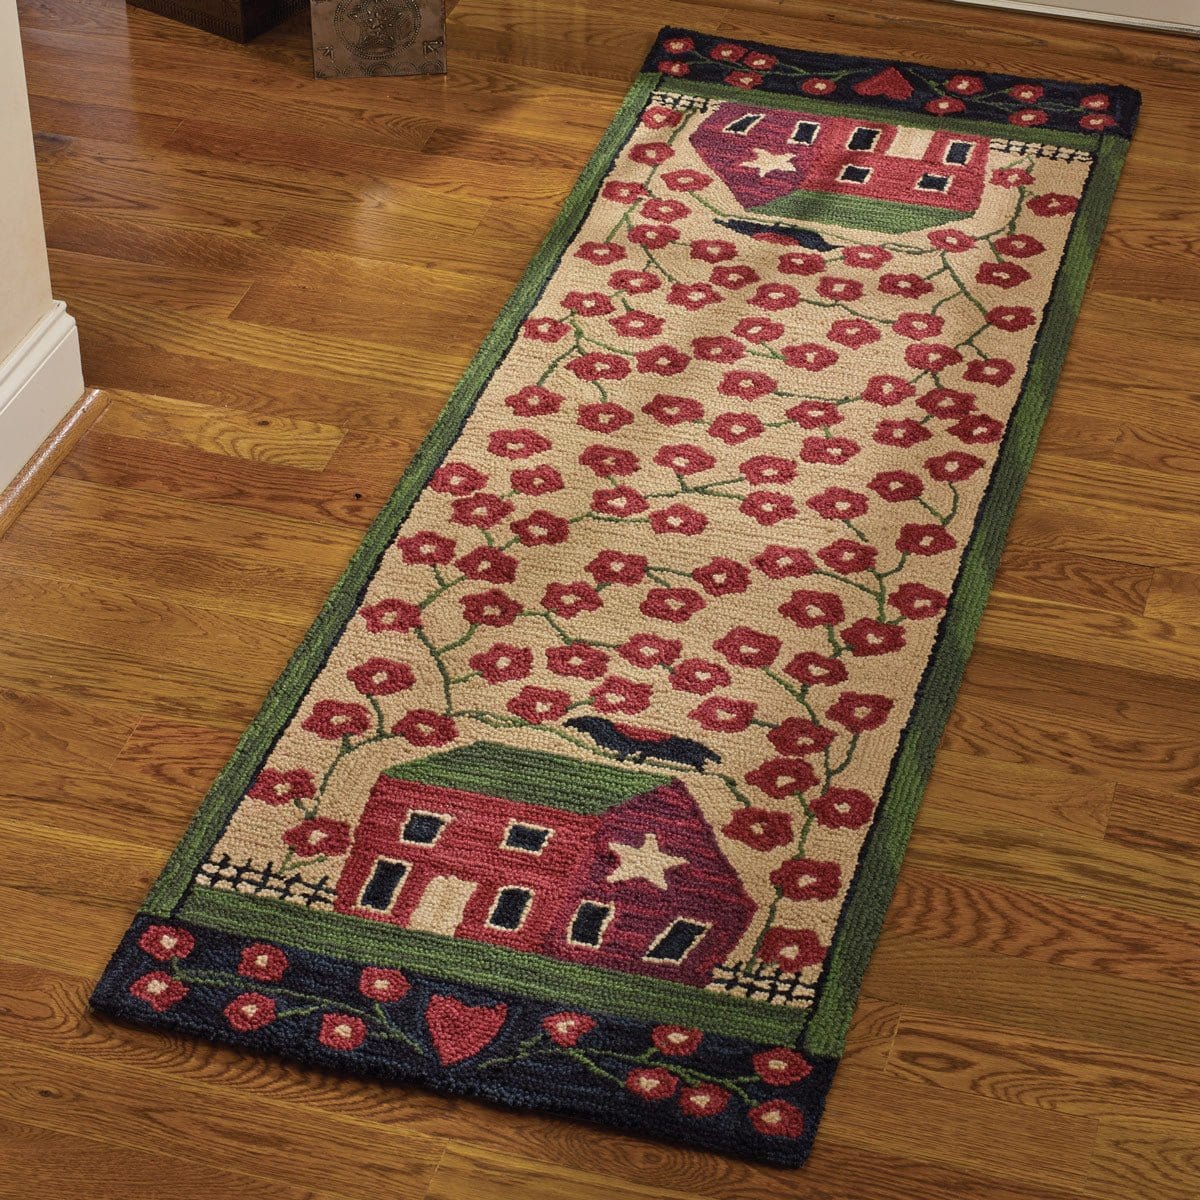 Red House Hooked Rug 24" x 72" Runner-Park Designs-The Village Merchant